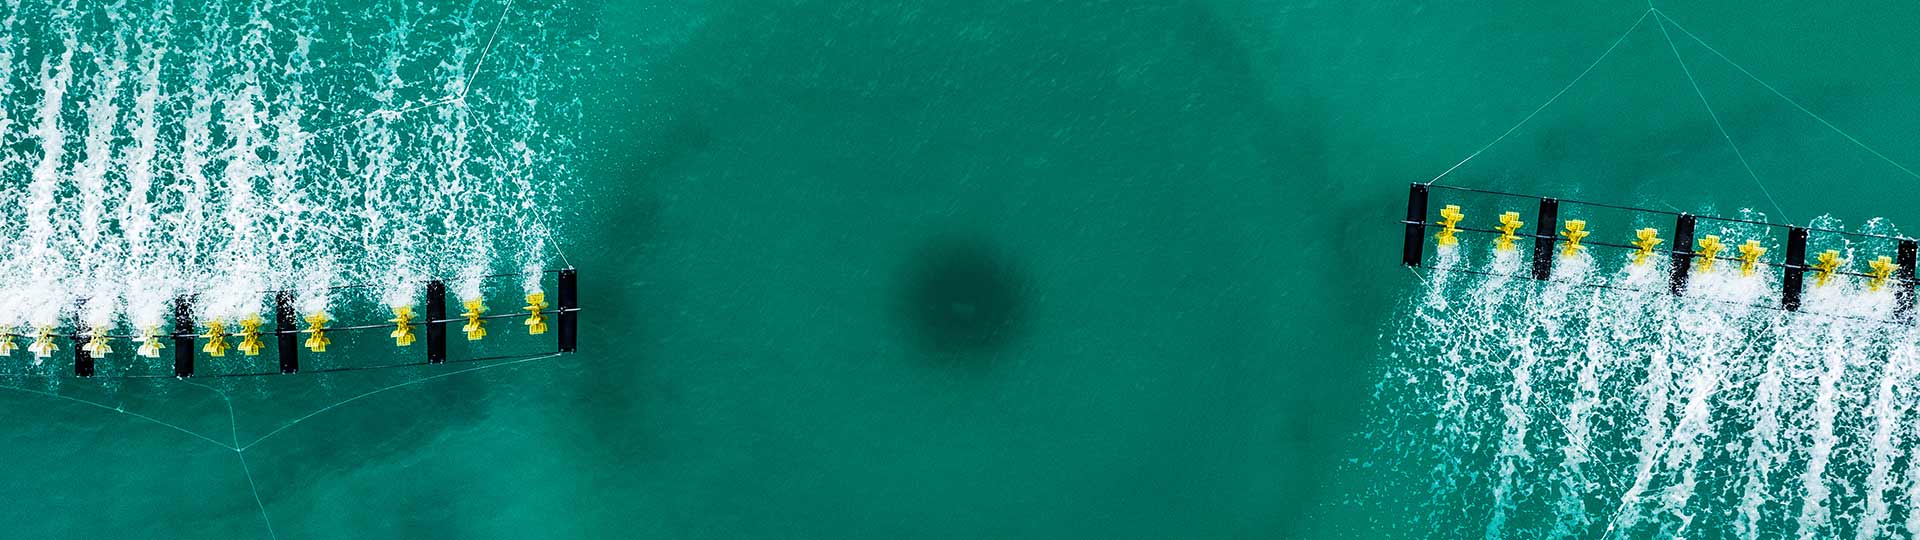 Aerial shot of drone looking down on a sprinkler in a water treatment tank